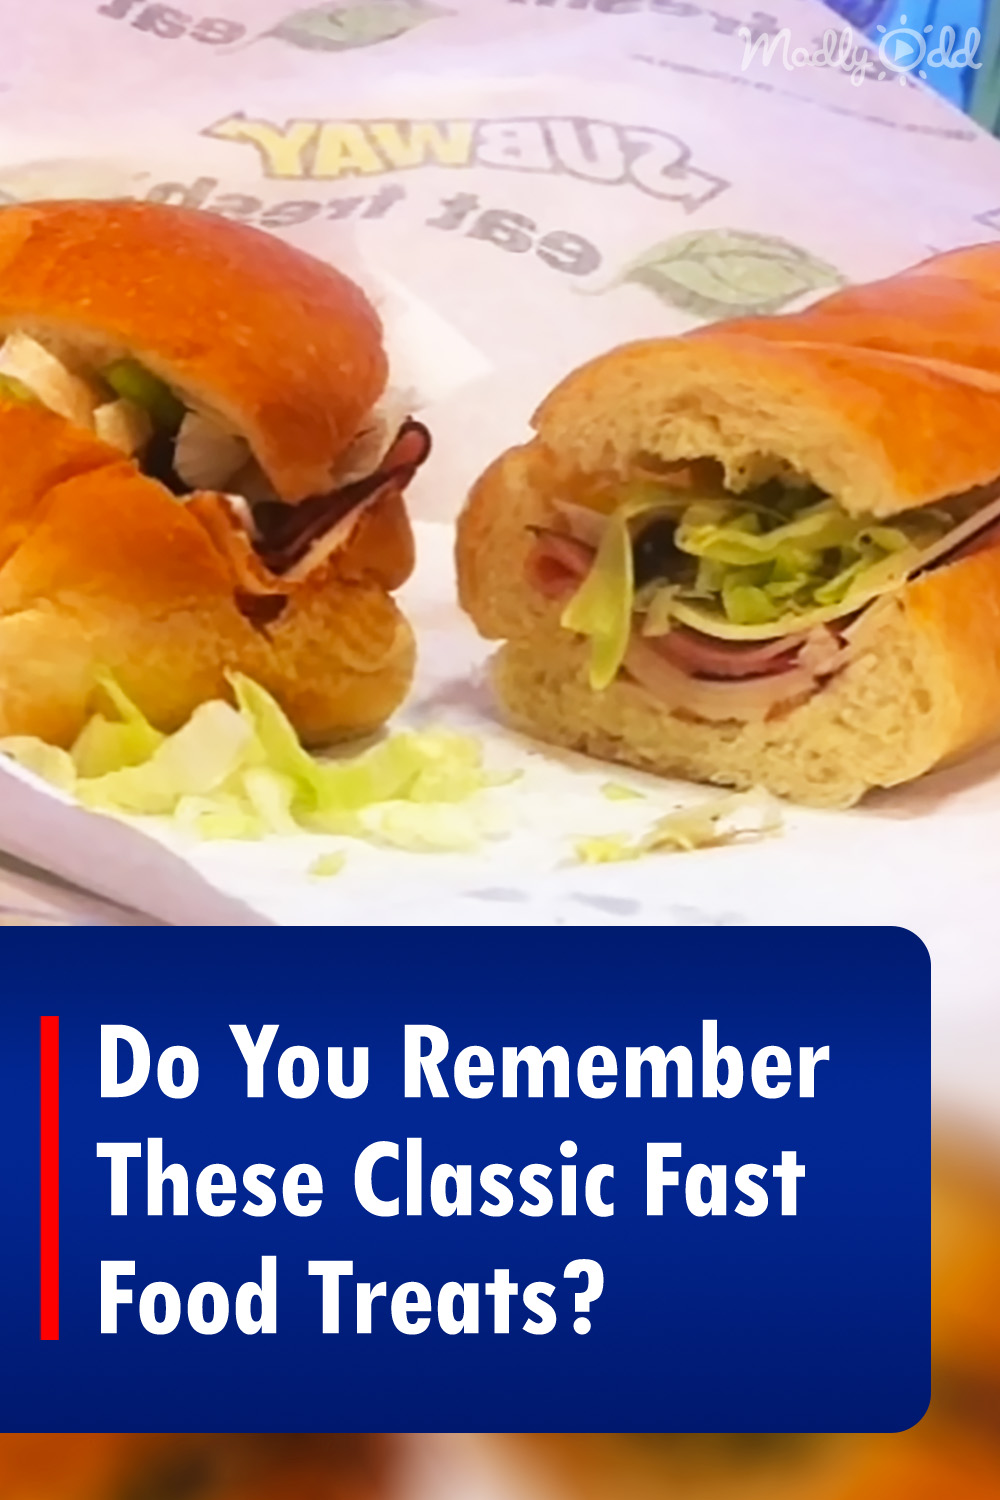 Do You Remember These Classic Fast Food Treats?